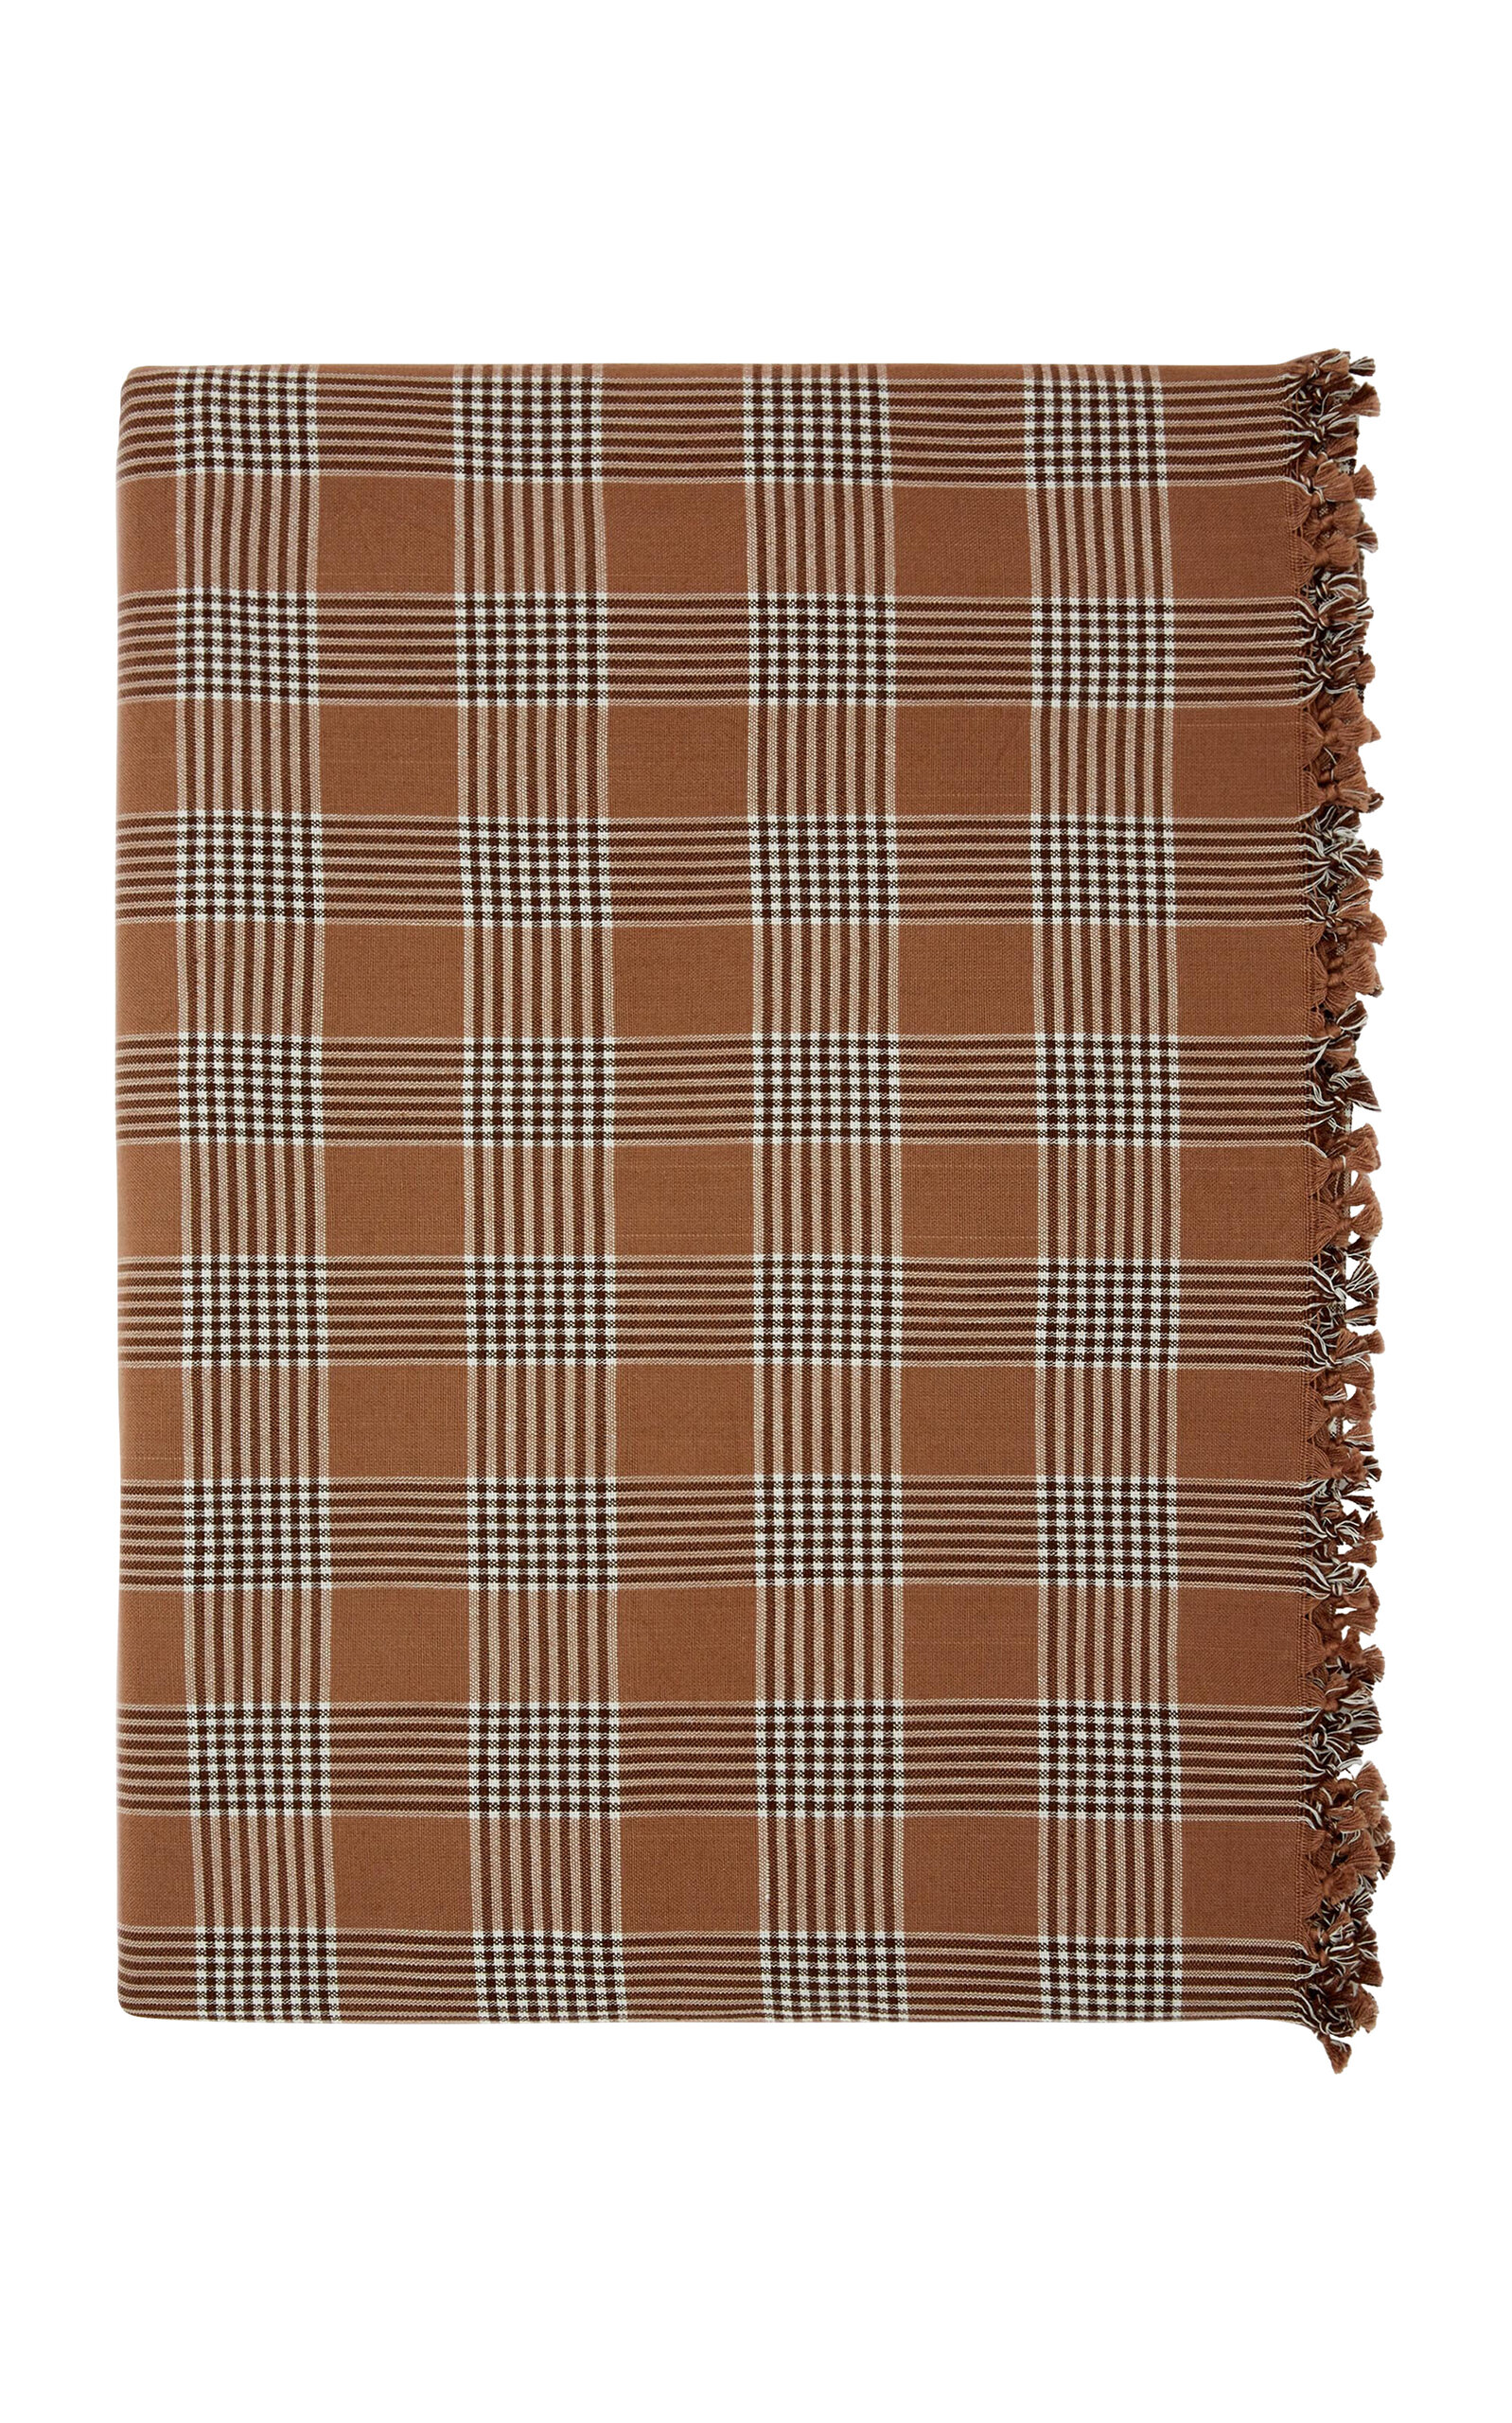 Heather Taylor Home Glen Plaid Chestnut Tablecloth Small In Multi